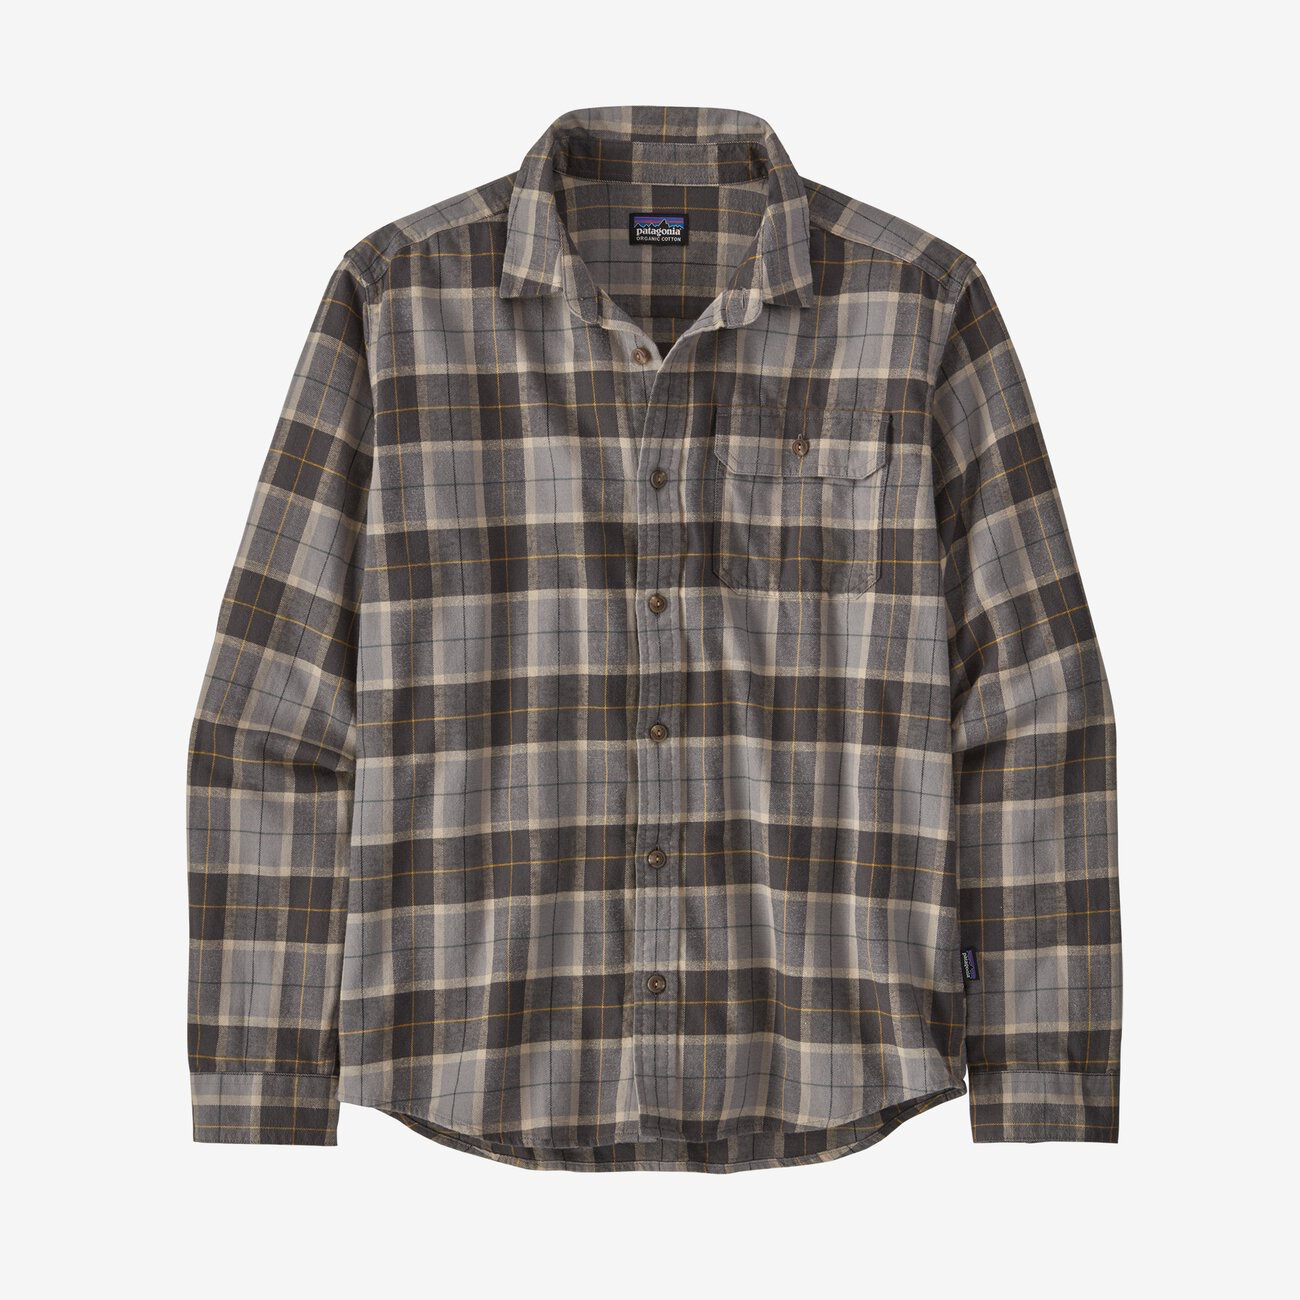 Patagonia M's L/S Cotton in Conversion LW Fjord Flannel Shirt - Beach Plaid: Forge Grey - Large